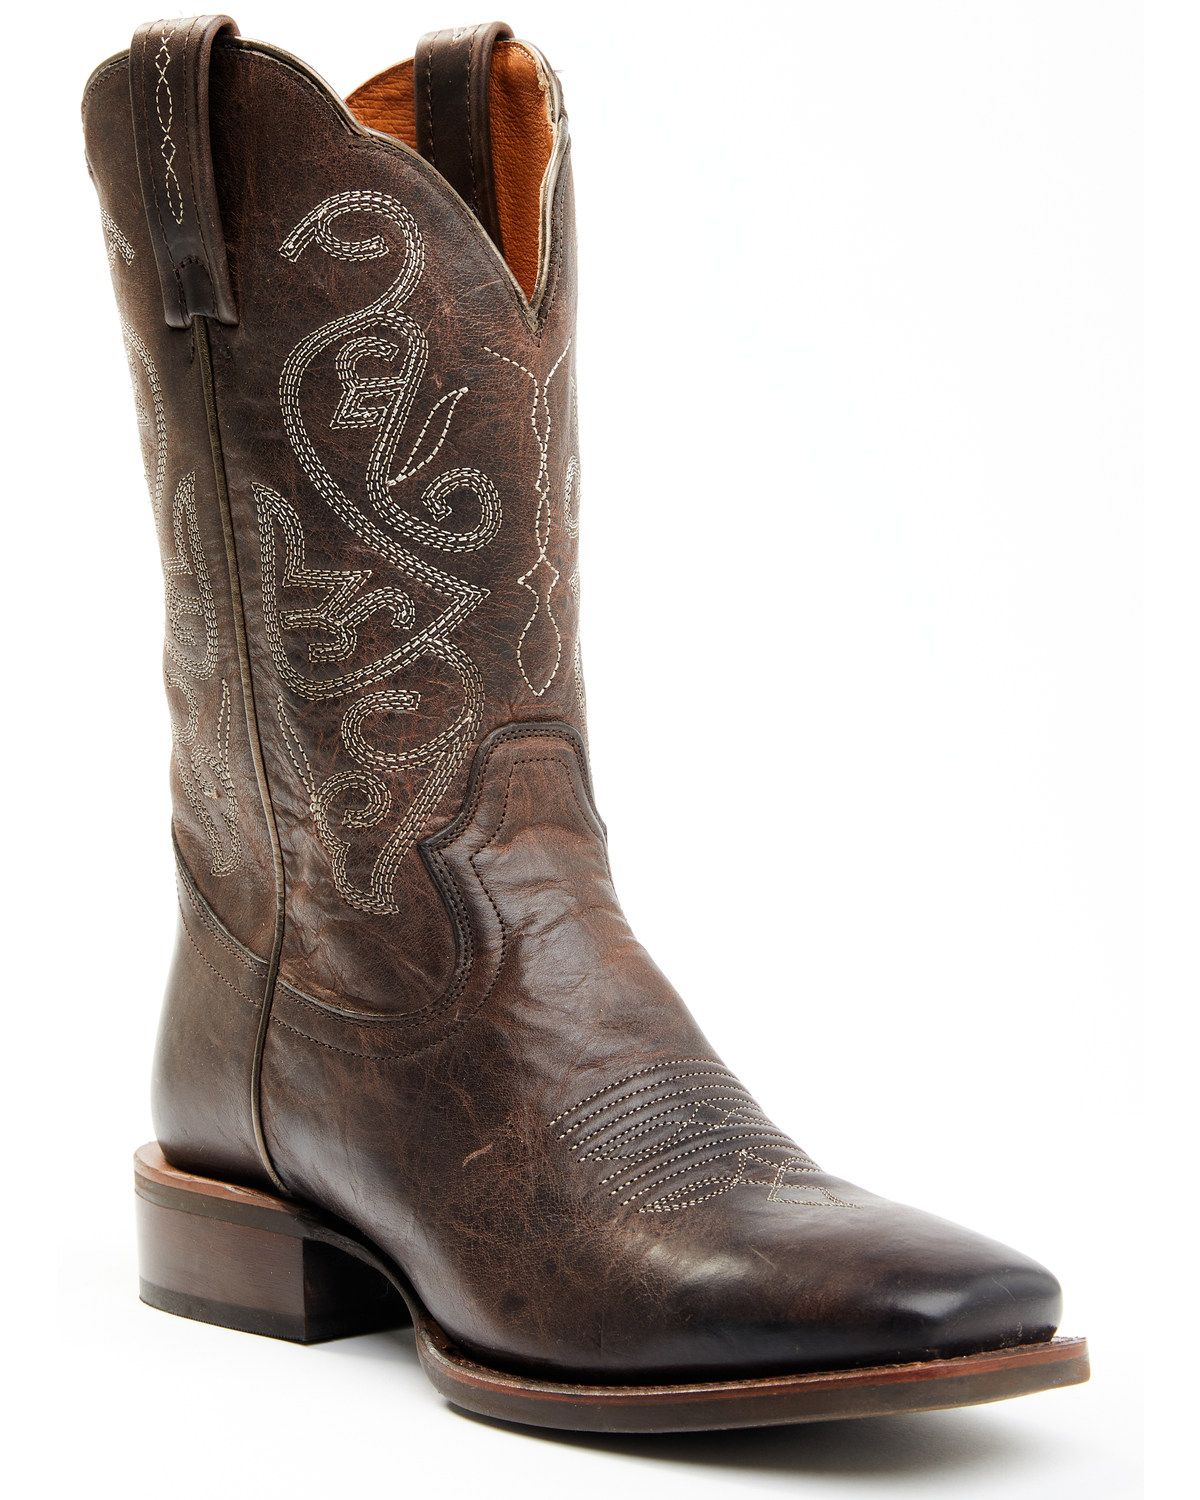 Idyllwind Women's Giddy Up Leather Western Boot - Broad Square Toe